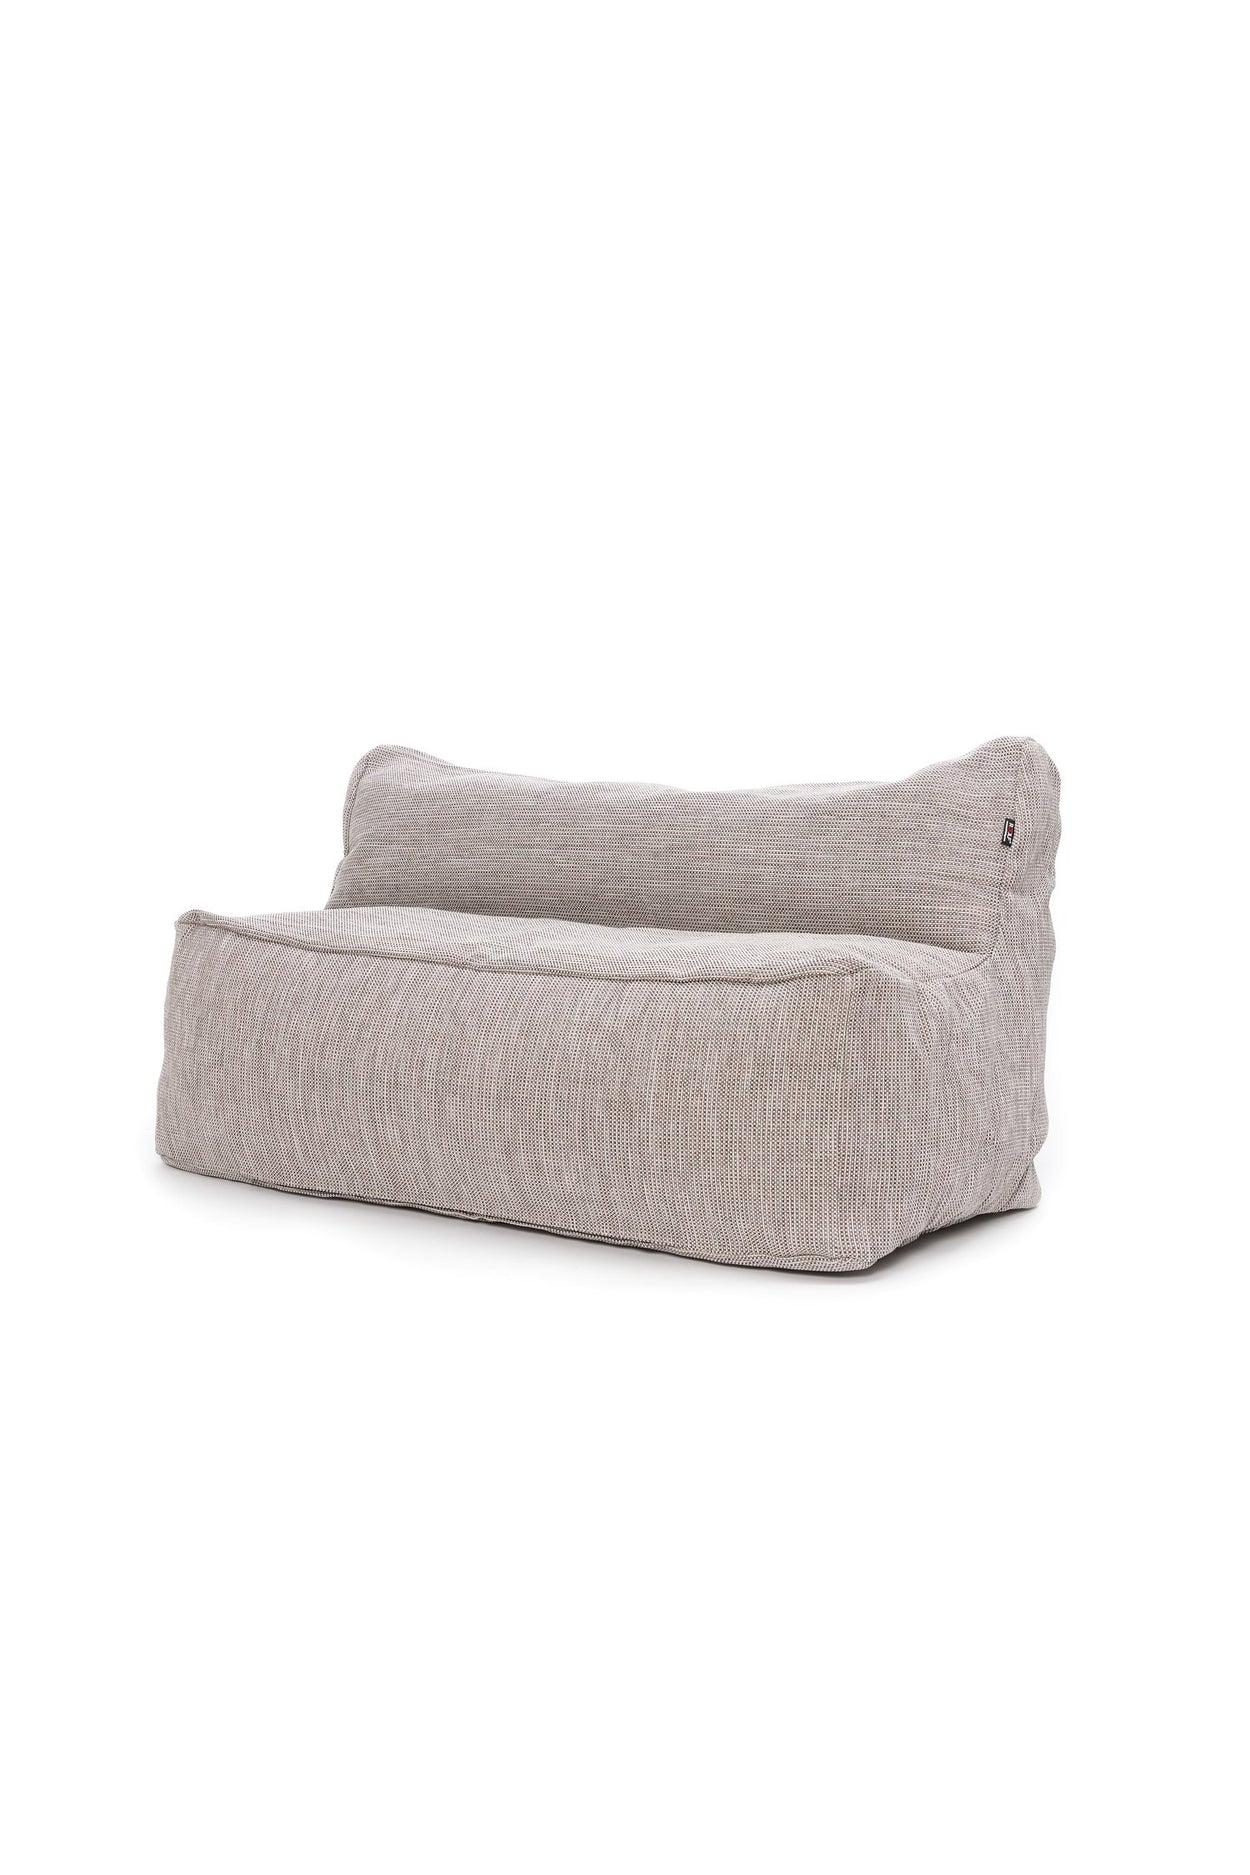 Love Seat out/indoor